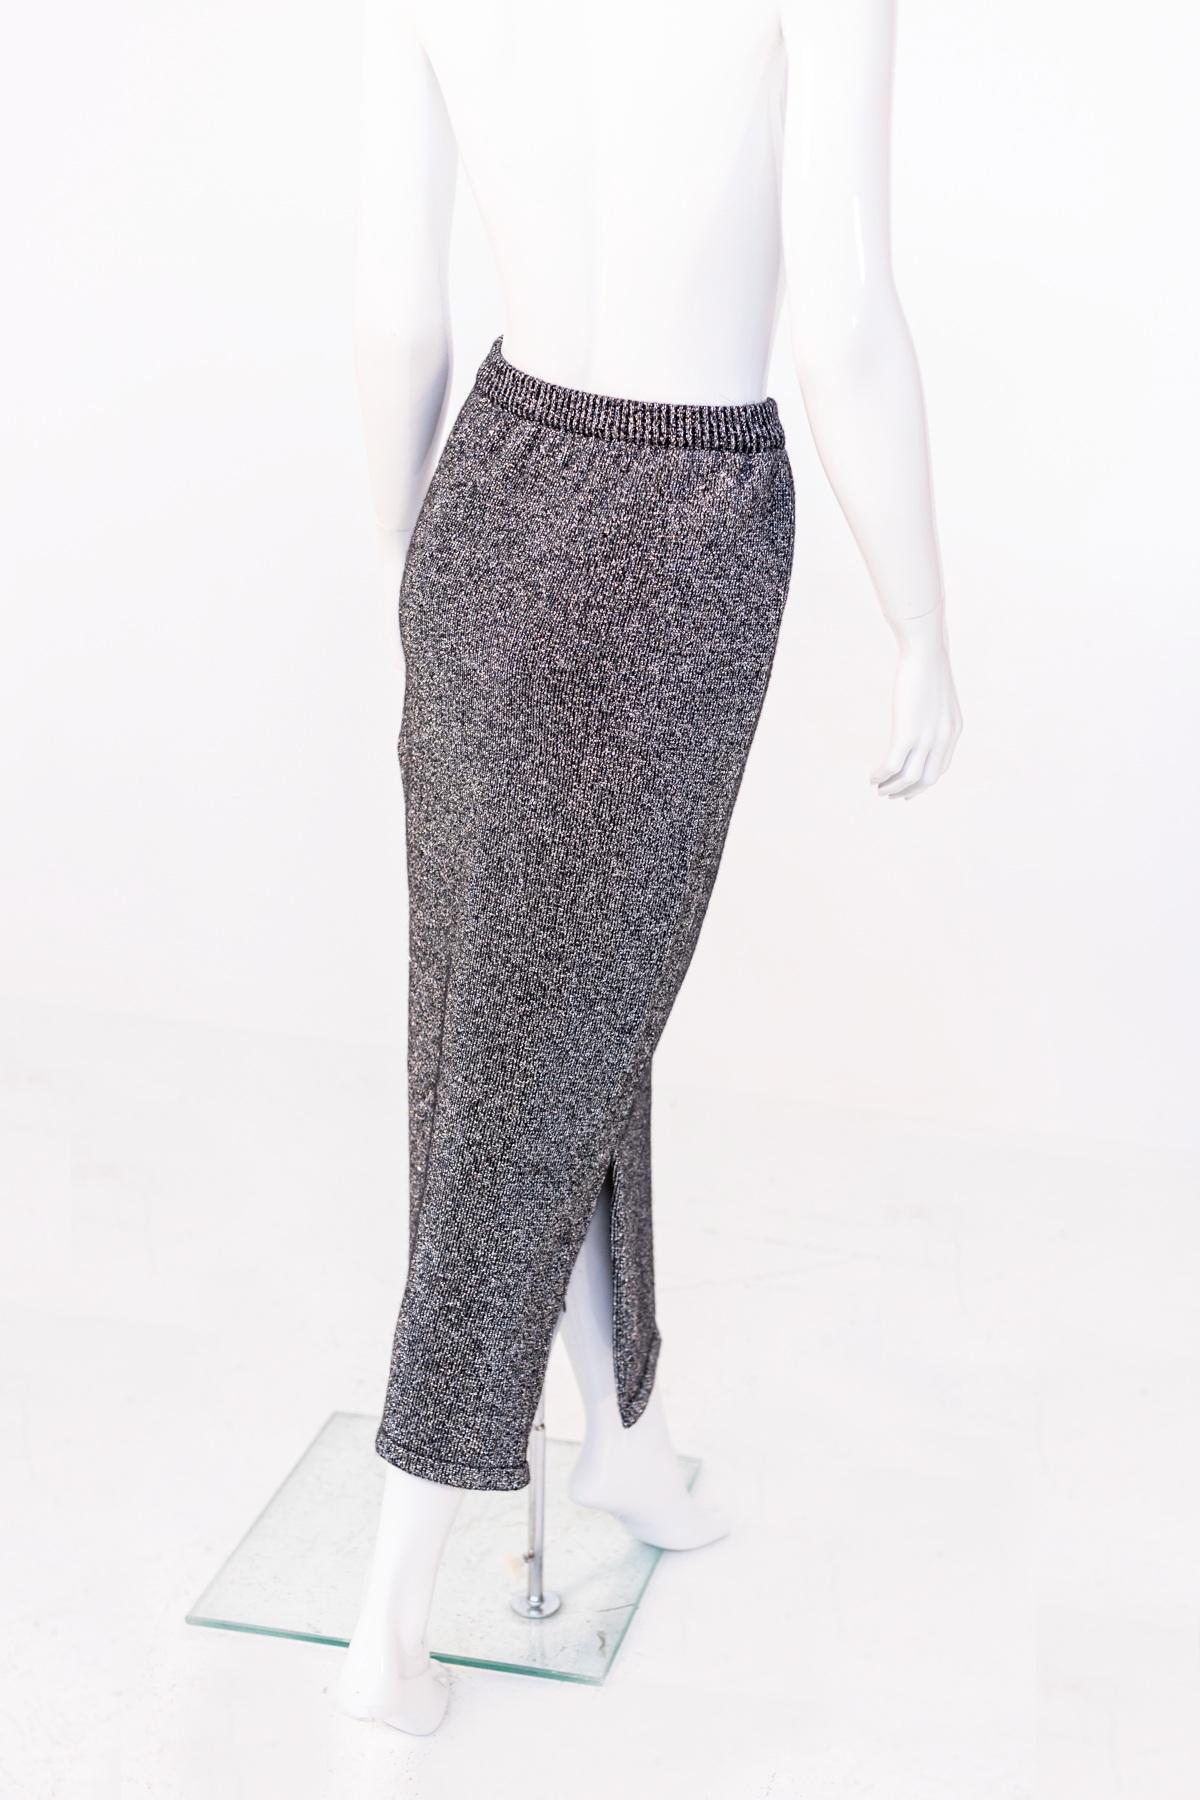 Krizia Casual Vintage Grey Long Skirt In Good Condition For Sale In Milano, IT